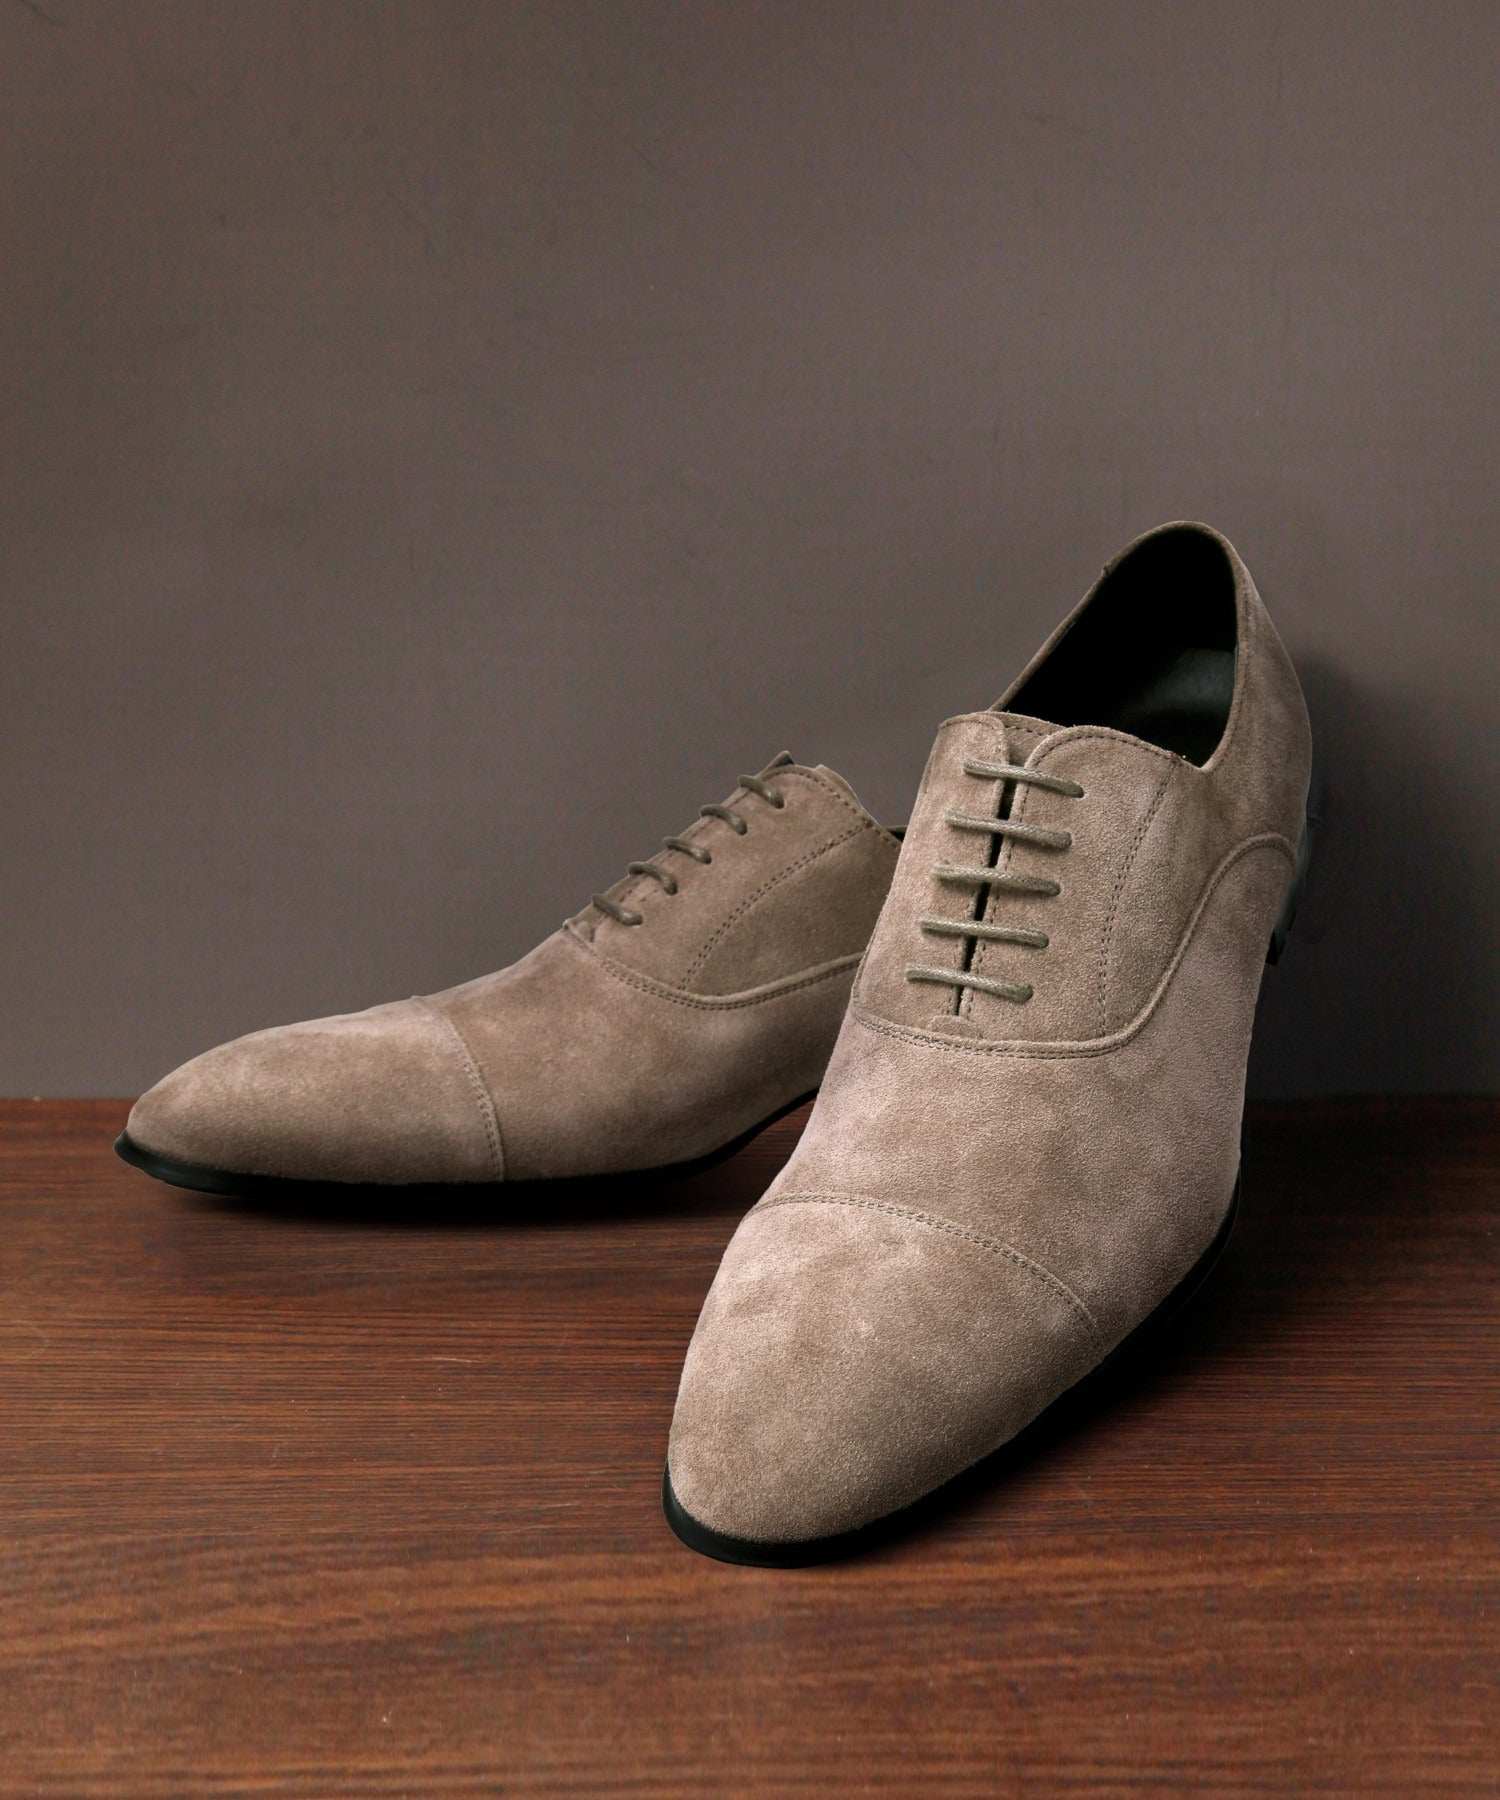 【GUIONNET】BUSINESS SHOES STRAIGHT TIP BS201 ビジネス 